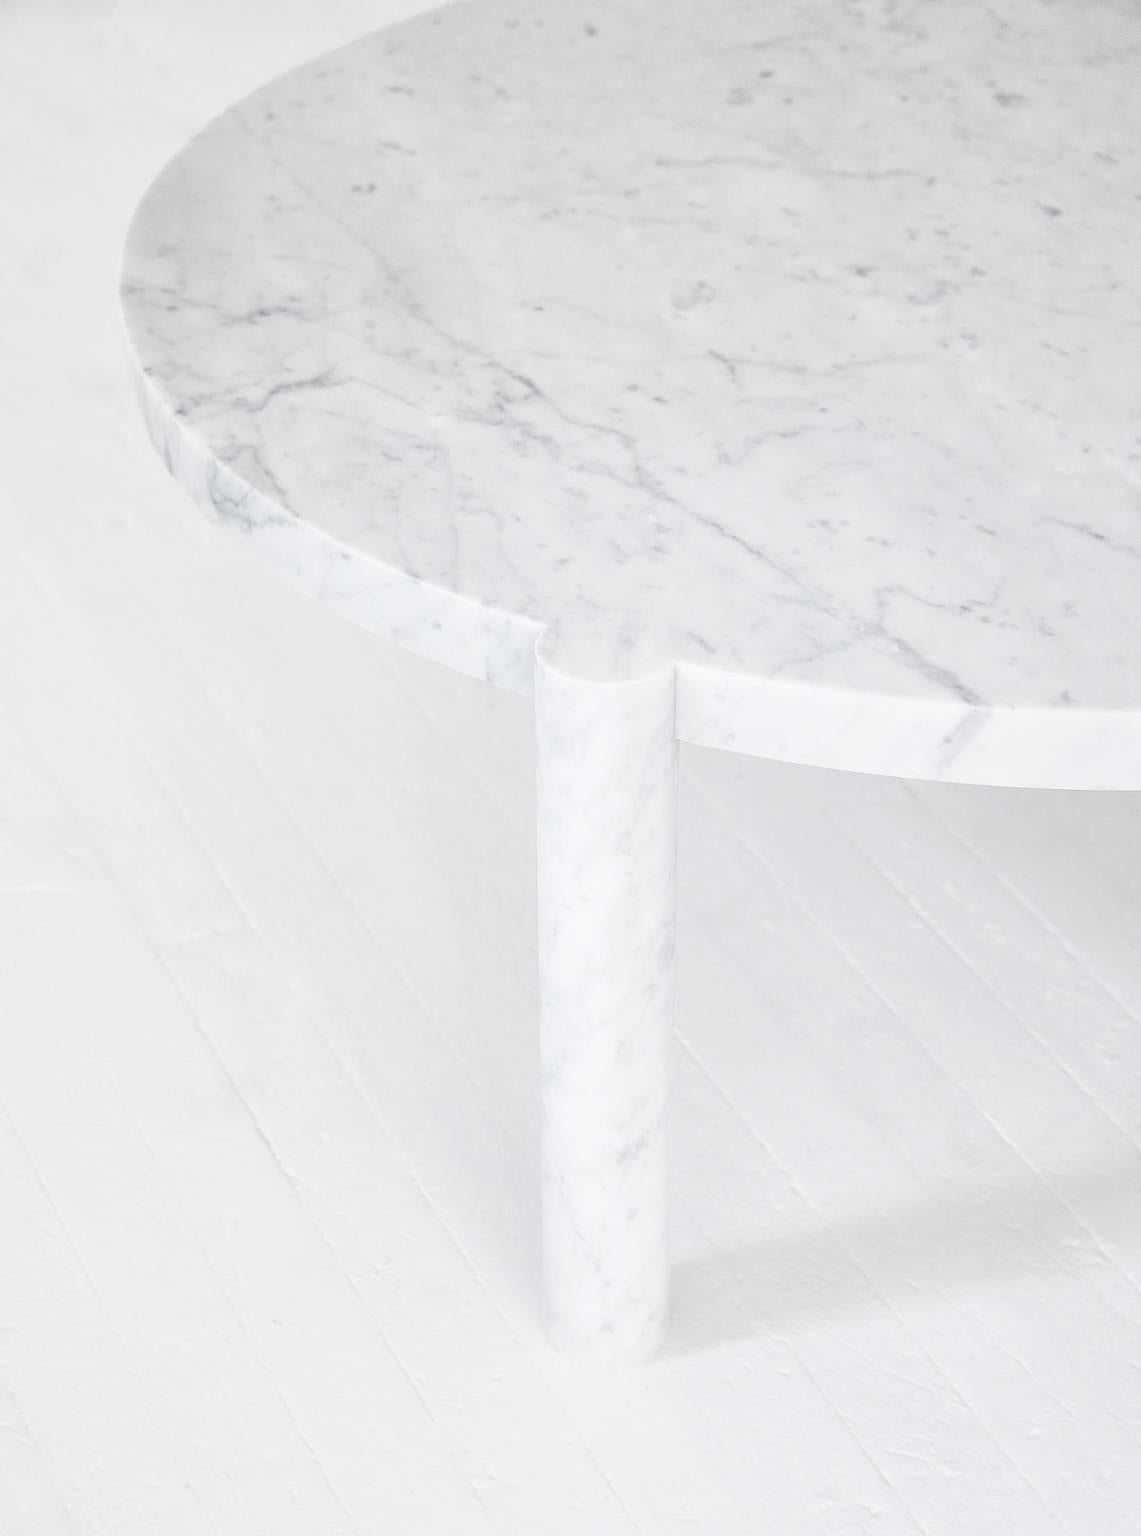 Steel WC1 Cocktail Table by ASH NYC in Grigio Carnico Marble